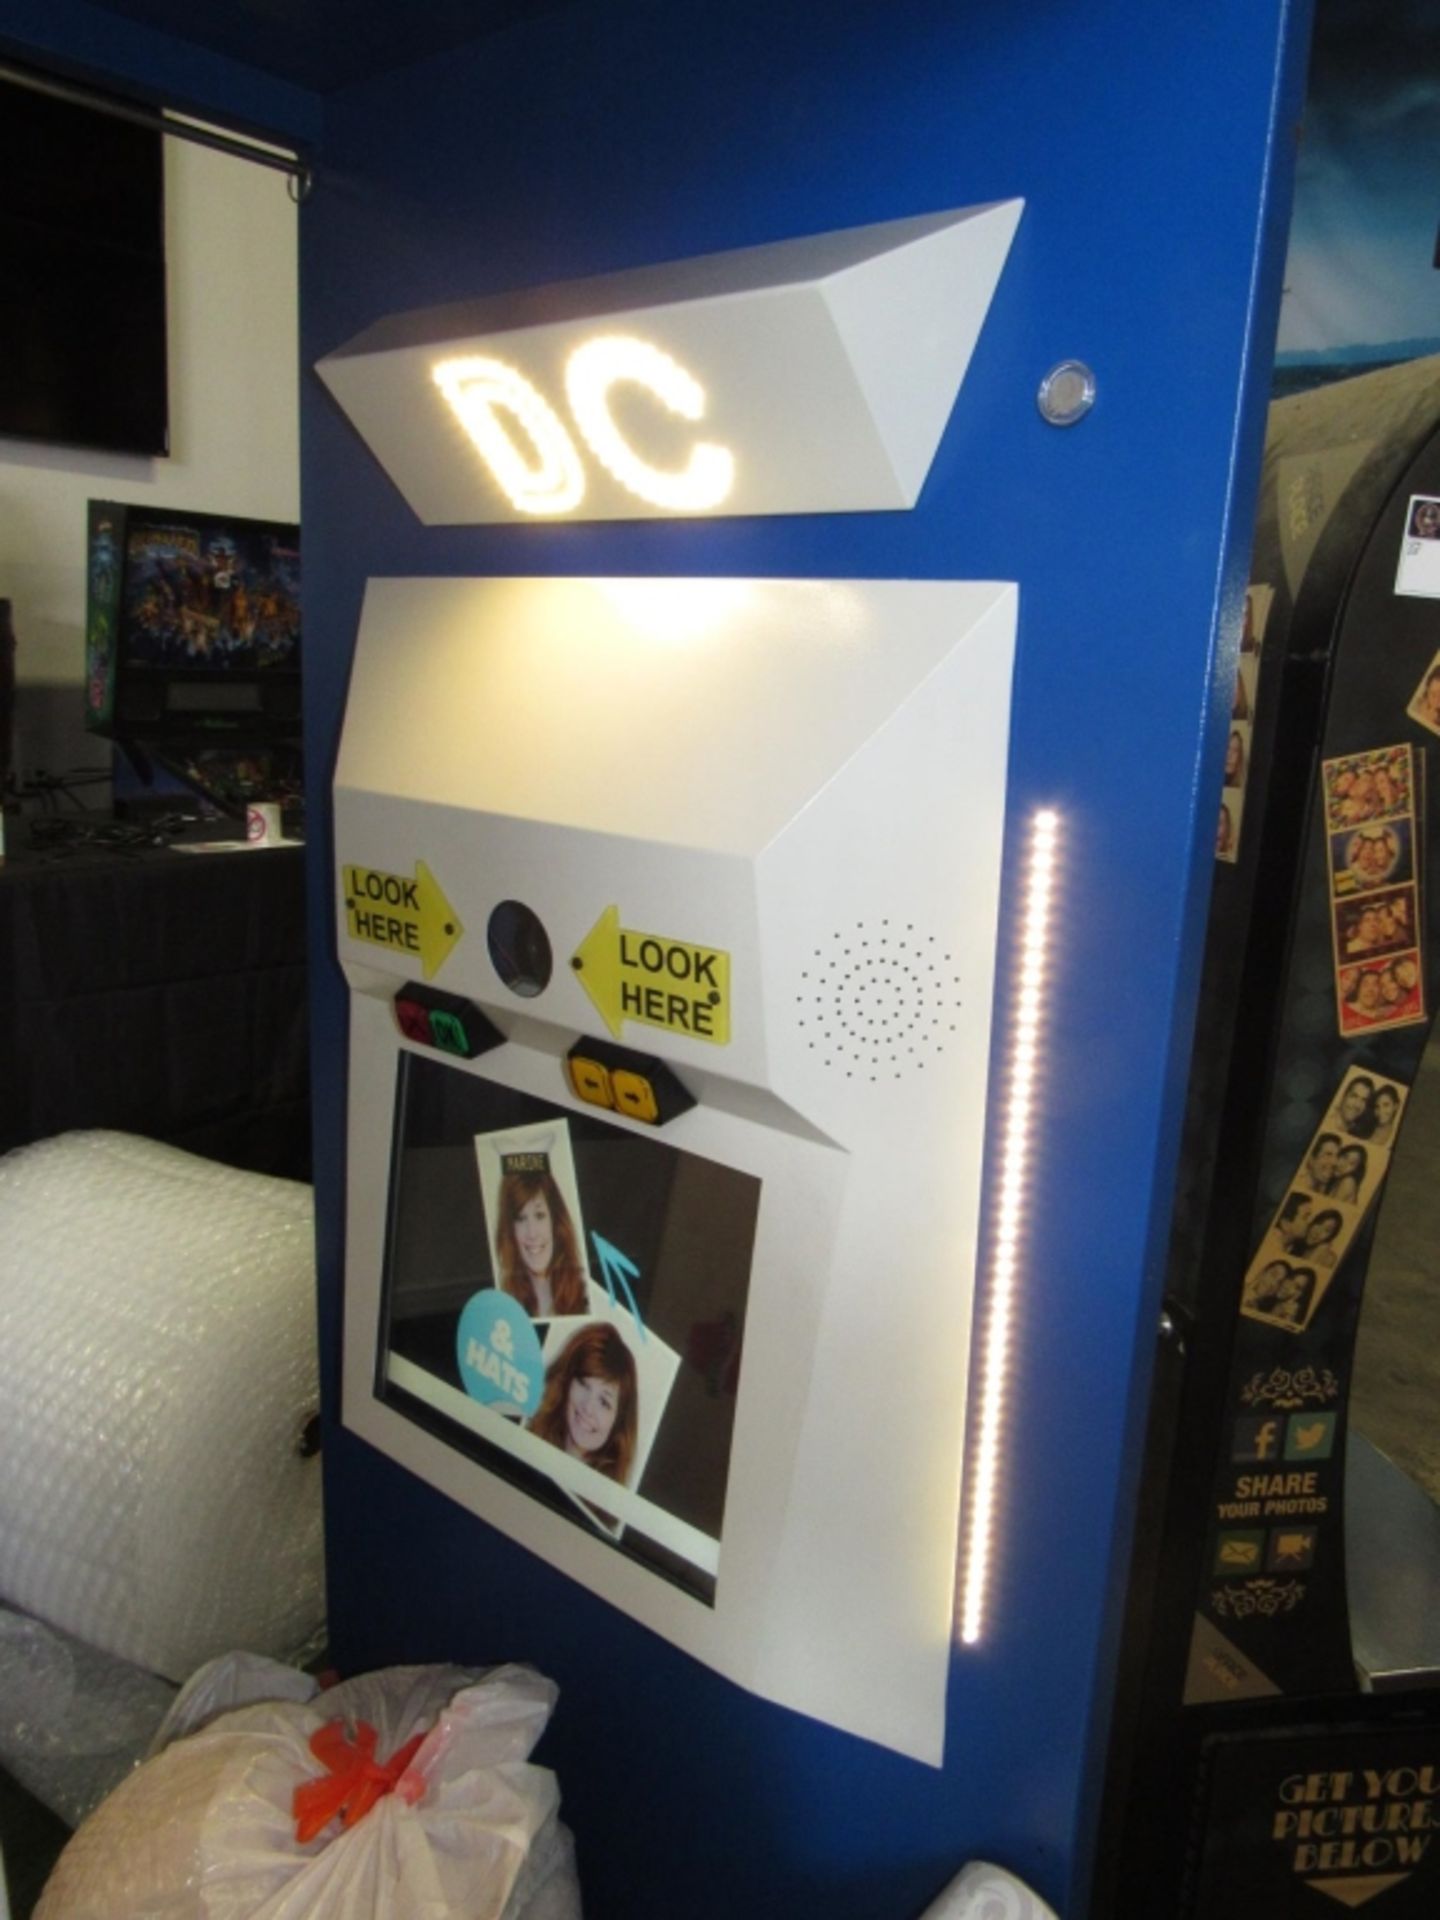 DC DIGITAL CENTER PHOTO BOOTH KIOSK W/ EXTRAS - Image 2 of 7